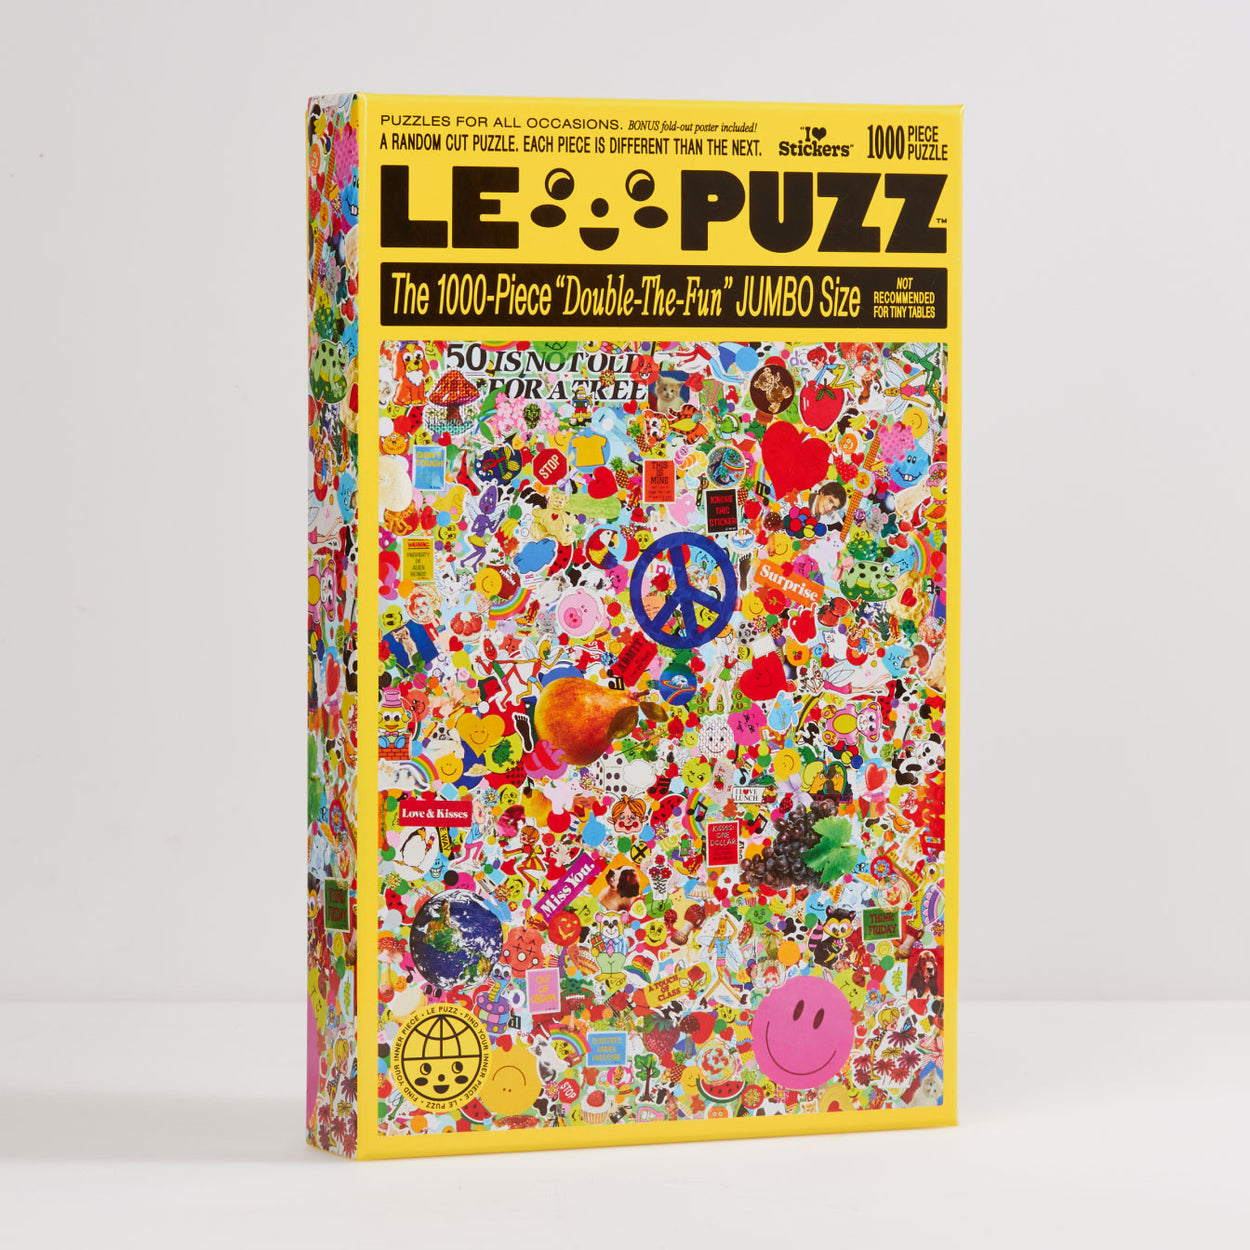 I heart stickers puzzle | Le Puzz | 1000 Pieces: Bright, neon stickers as a 1000 piece puzzle. I ❤️ Stickers, like no for real, we love love love stickers. This puzzle is a collage of over a thousand vintage stickers collected over the years. We included a list of a hundred or so of our faves on the back, can you find them all?